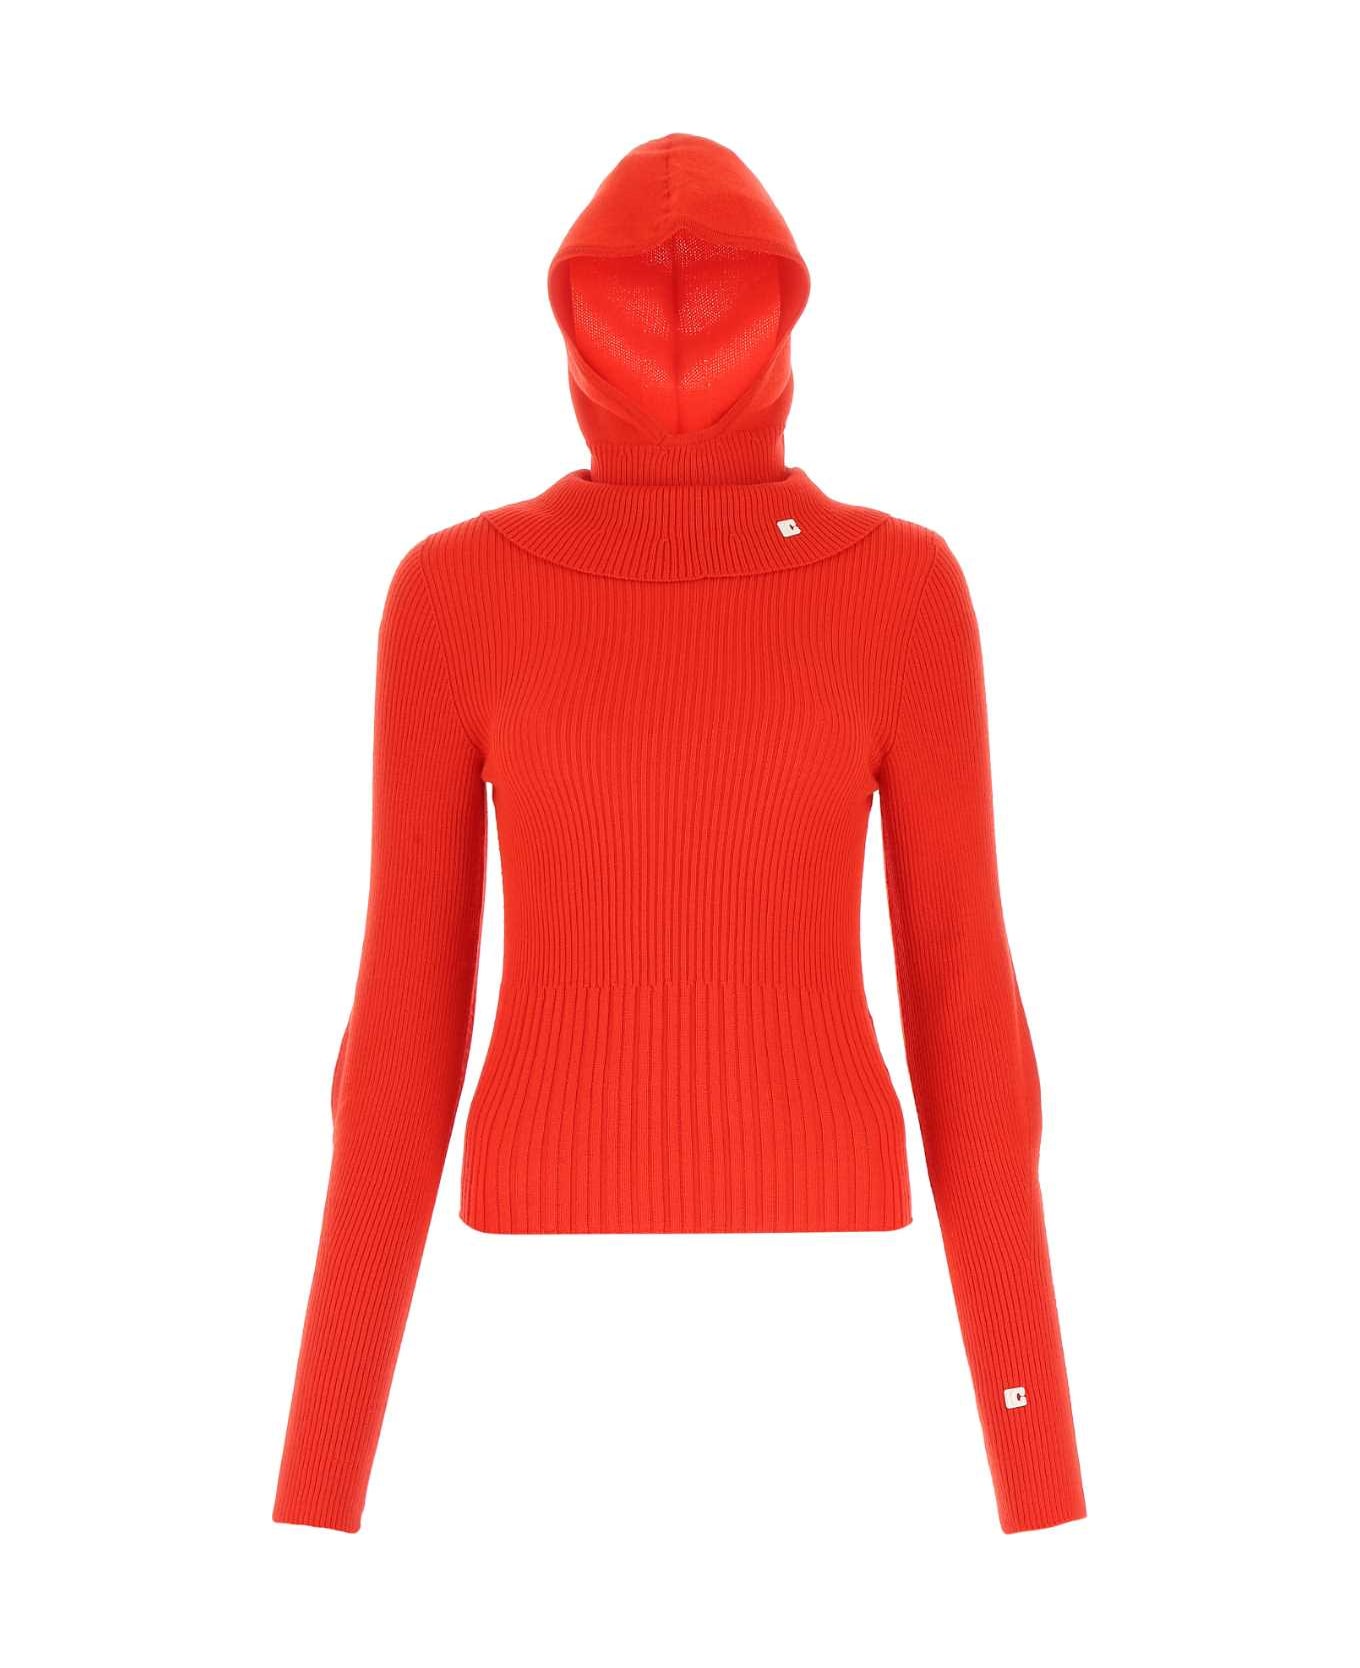 Low Classic Red Wool Sweater - 0374